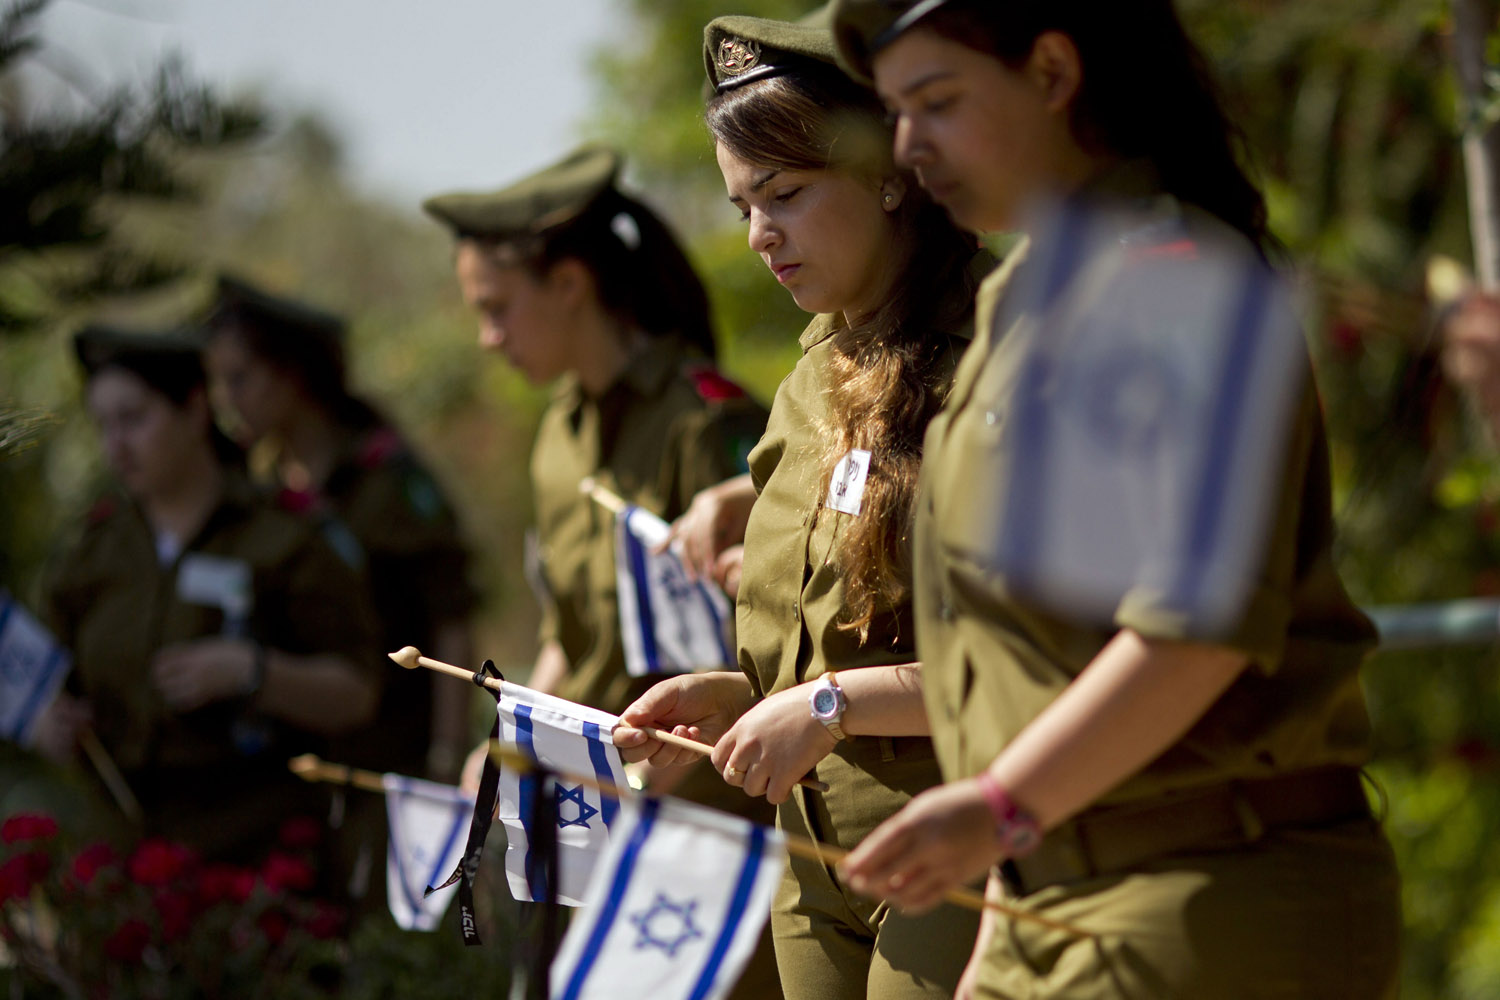 April 14, 2013. Israeli soldiers place Israeli flags with black ribbons on the graves of fallen soldiers at the Kiryat Shaul Military Cemetery in Tel Aviv.